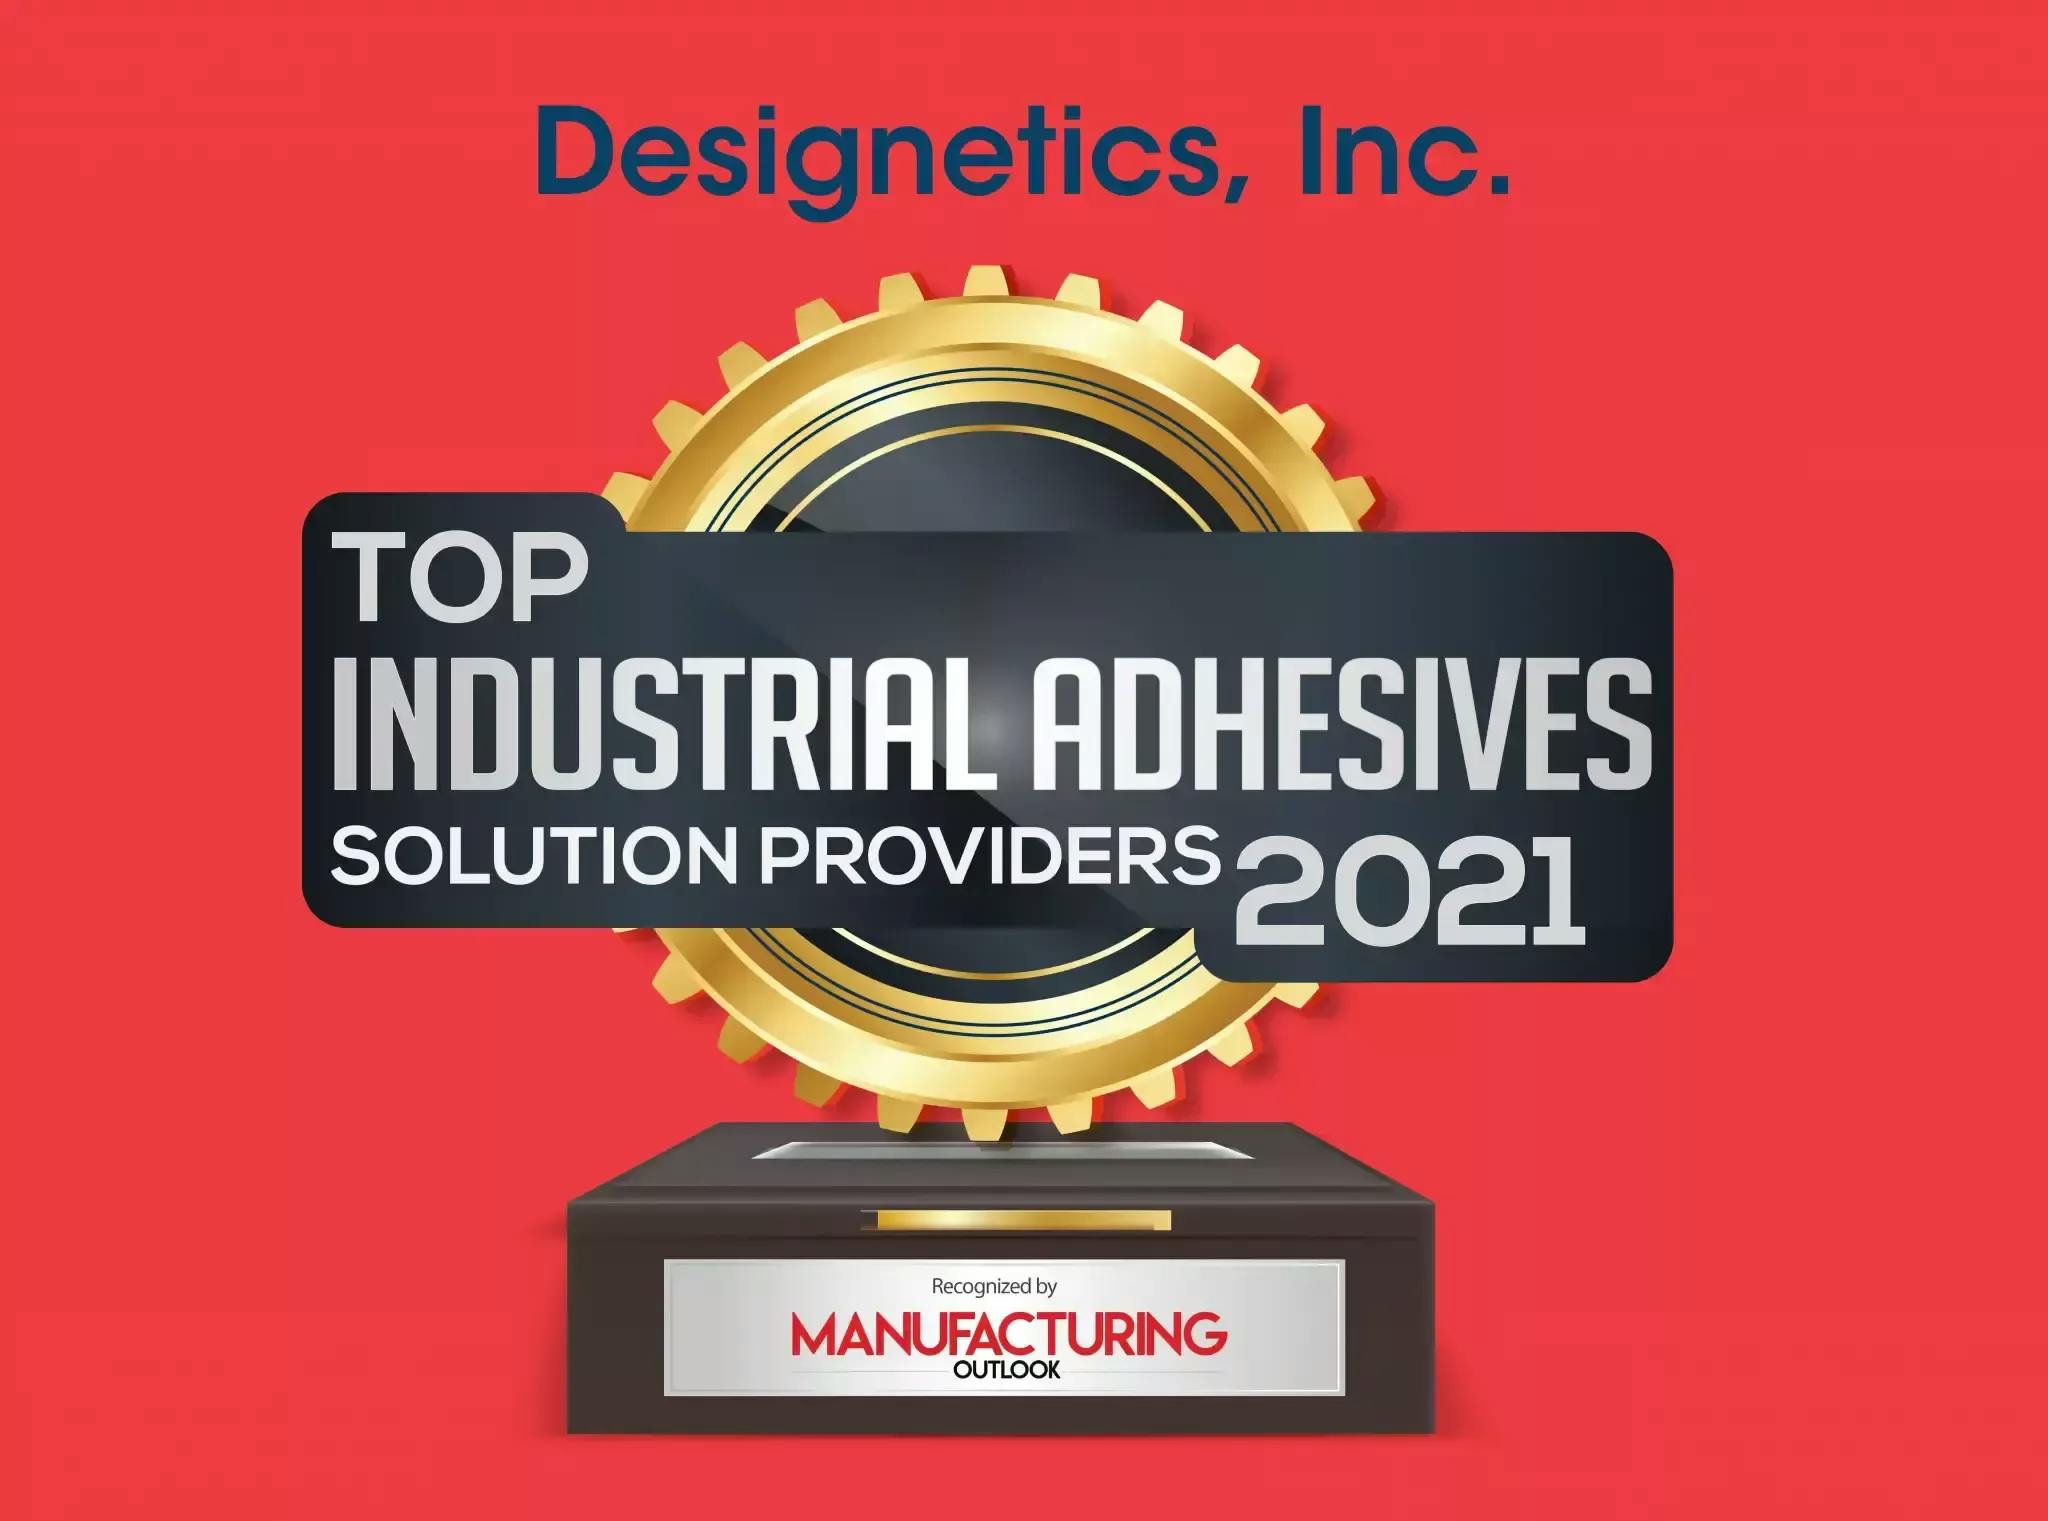 Top industrial adhesives solution provider 2021